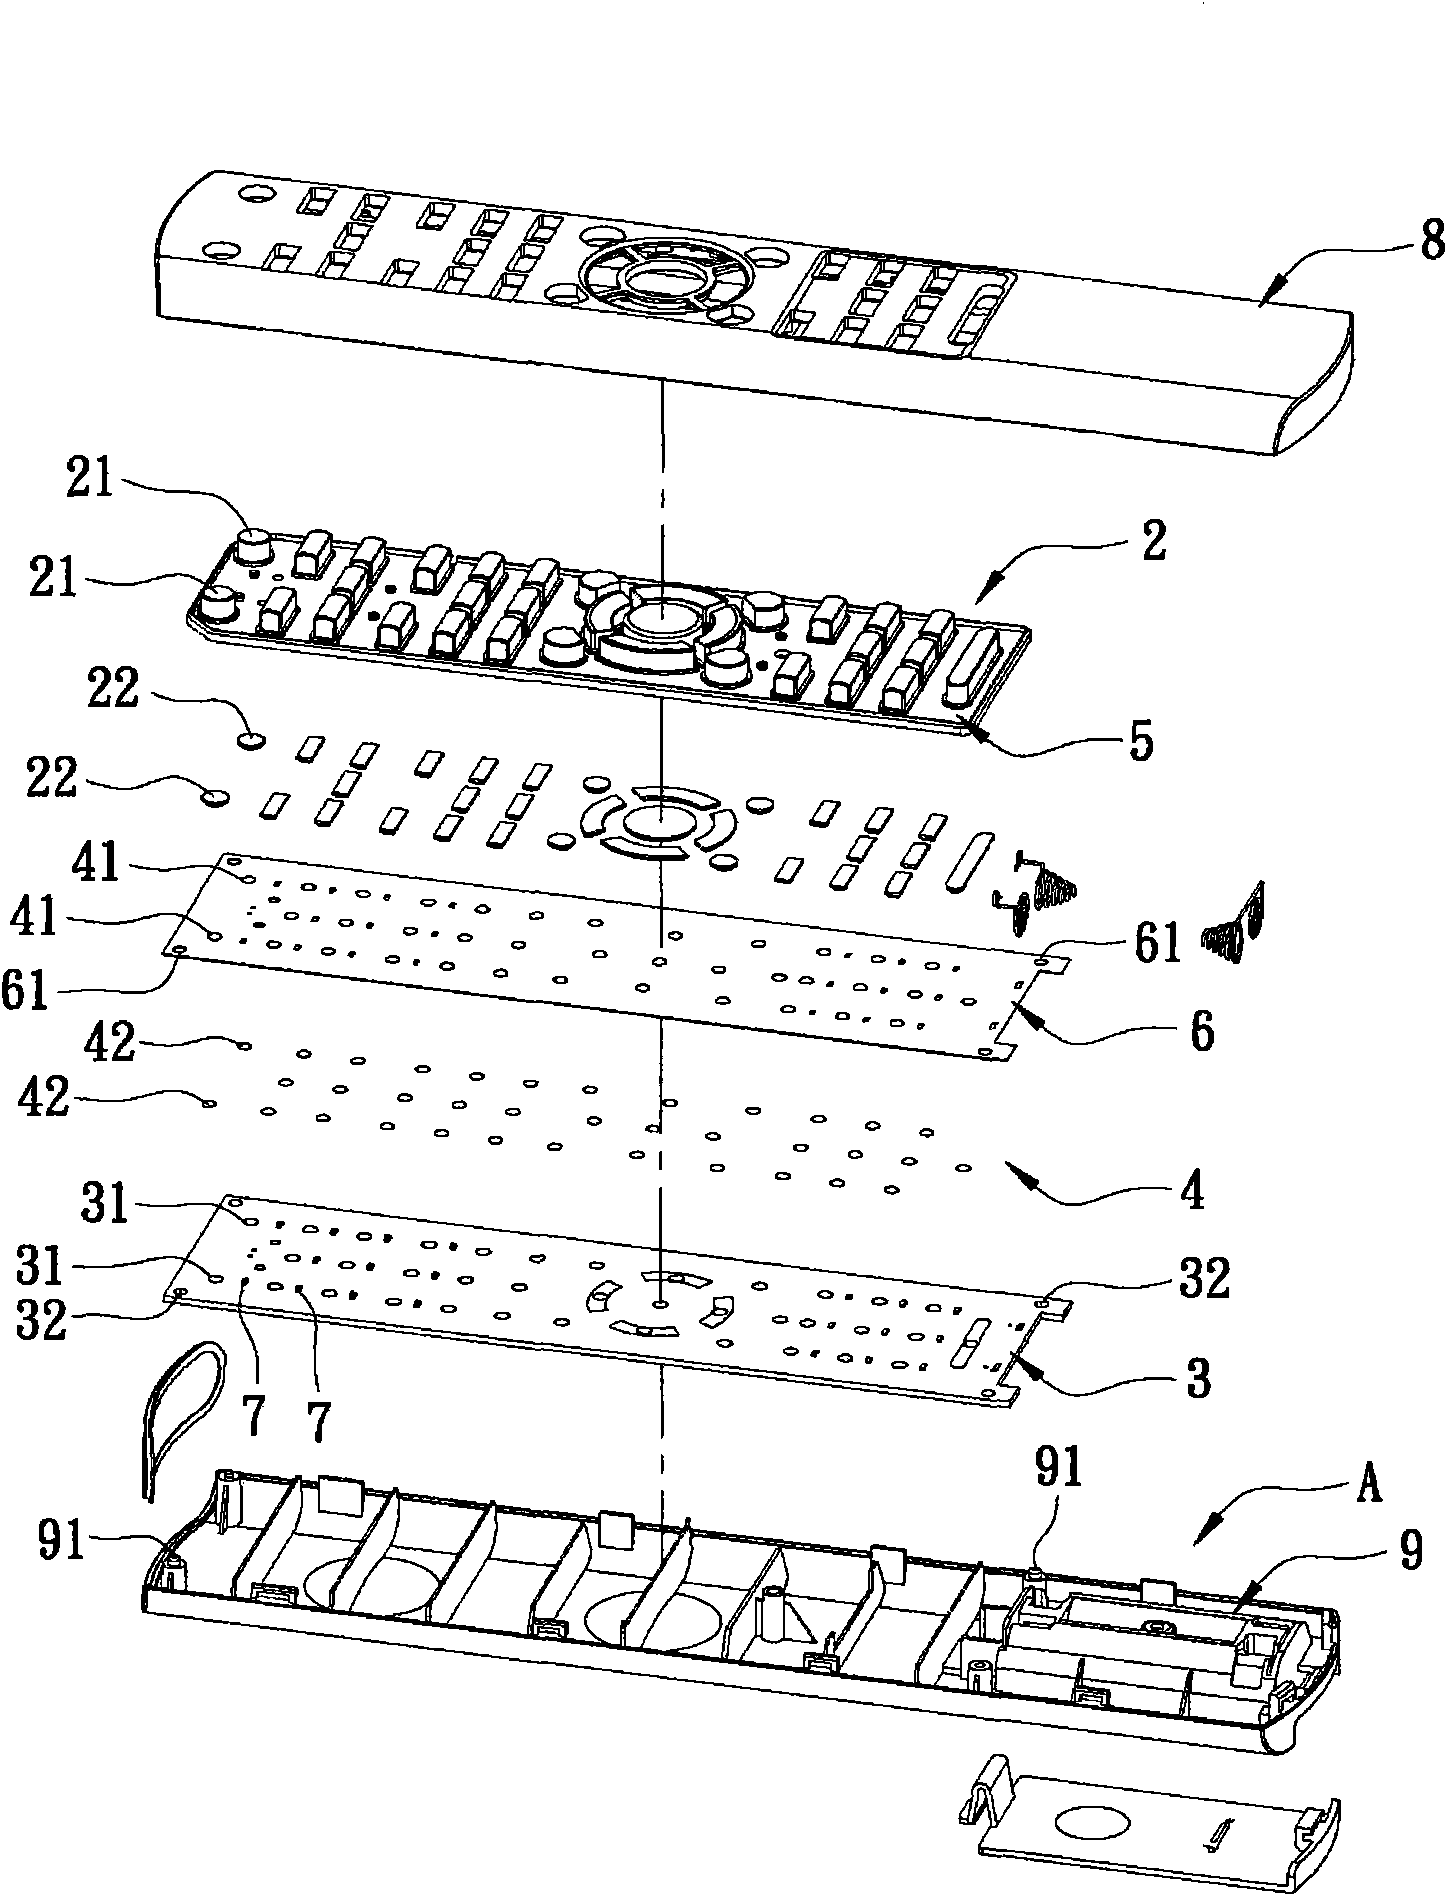 Input device capable of improving contact sensitivity